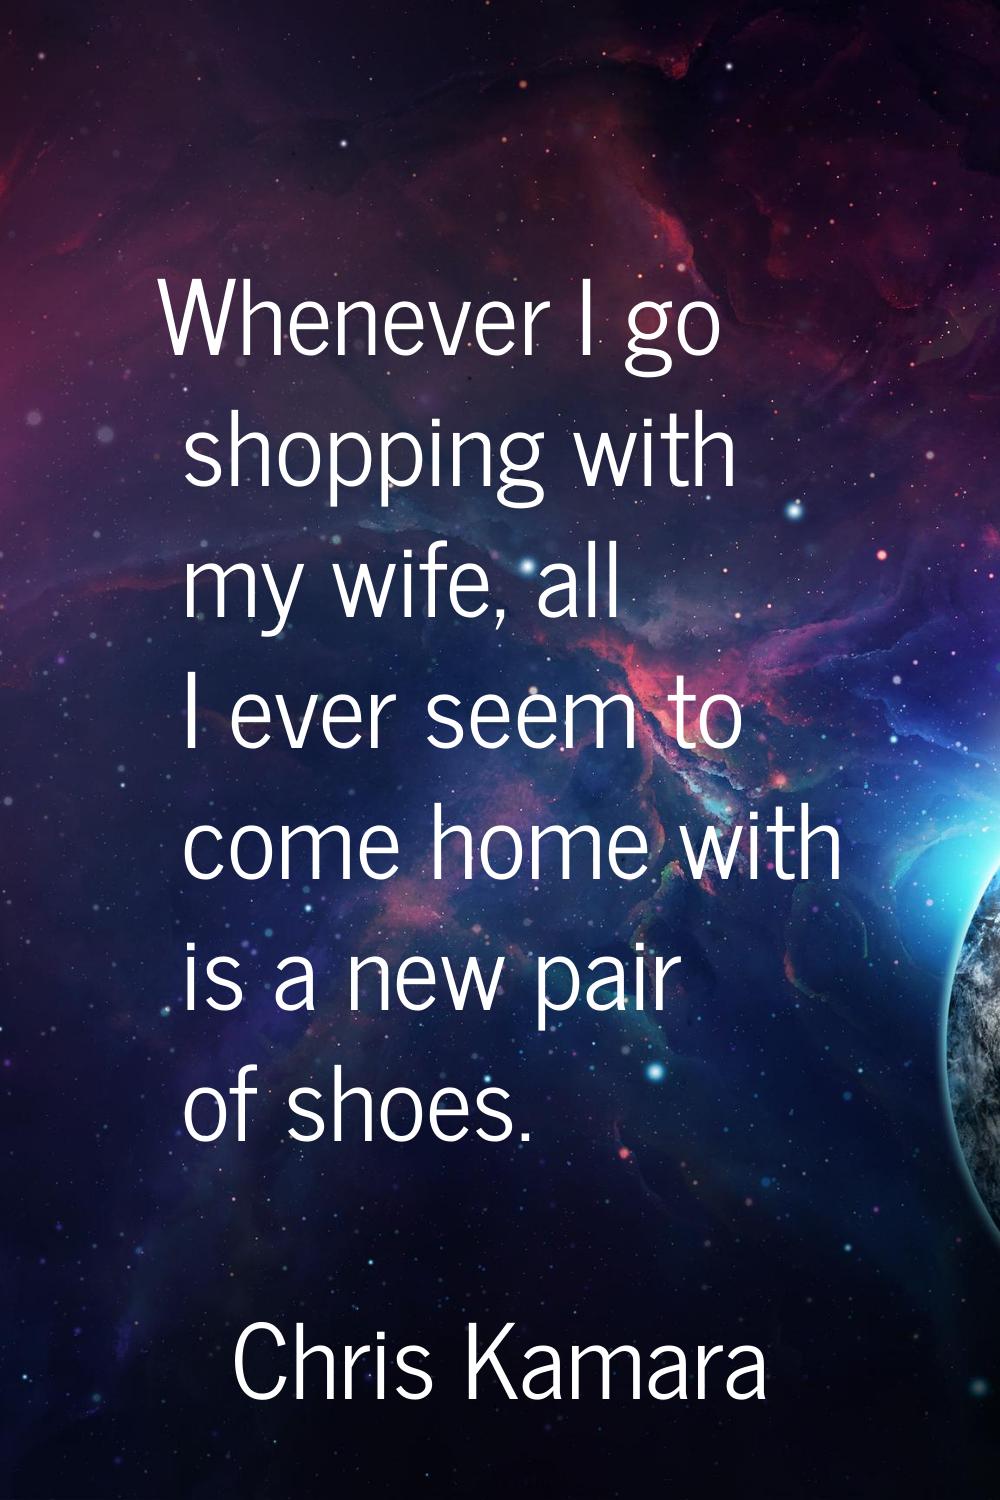 Whenever I go shopping with my wife, all I ever seem to come home with is a new pair of shoes.